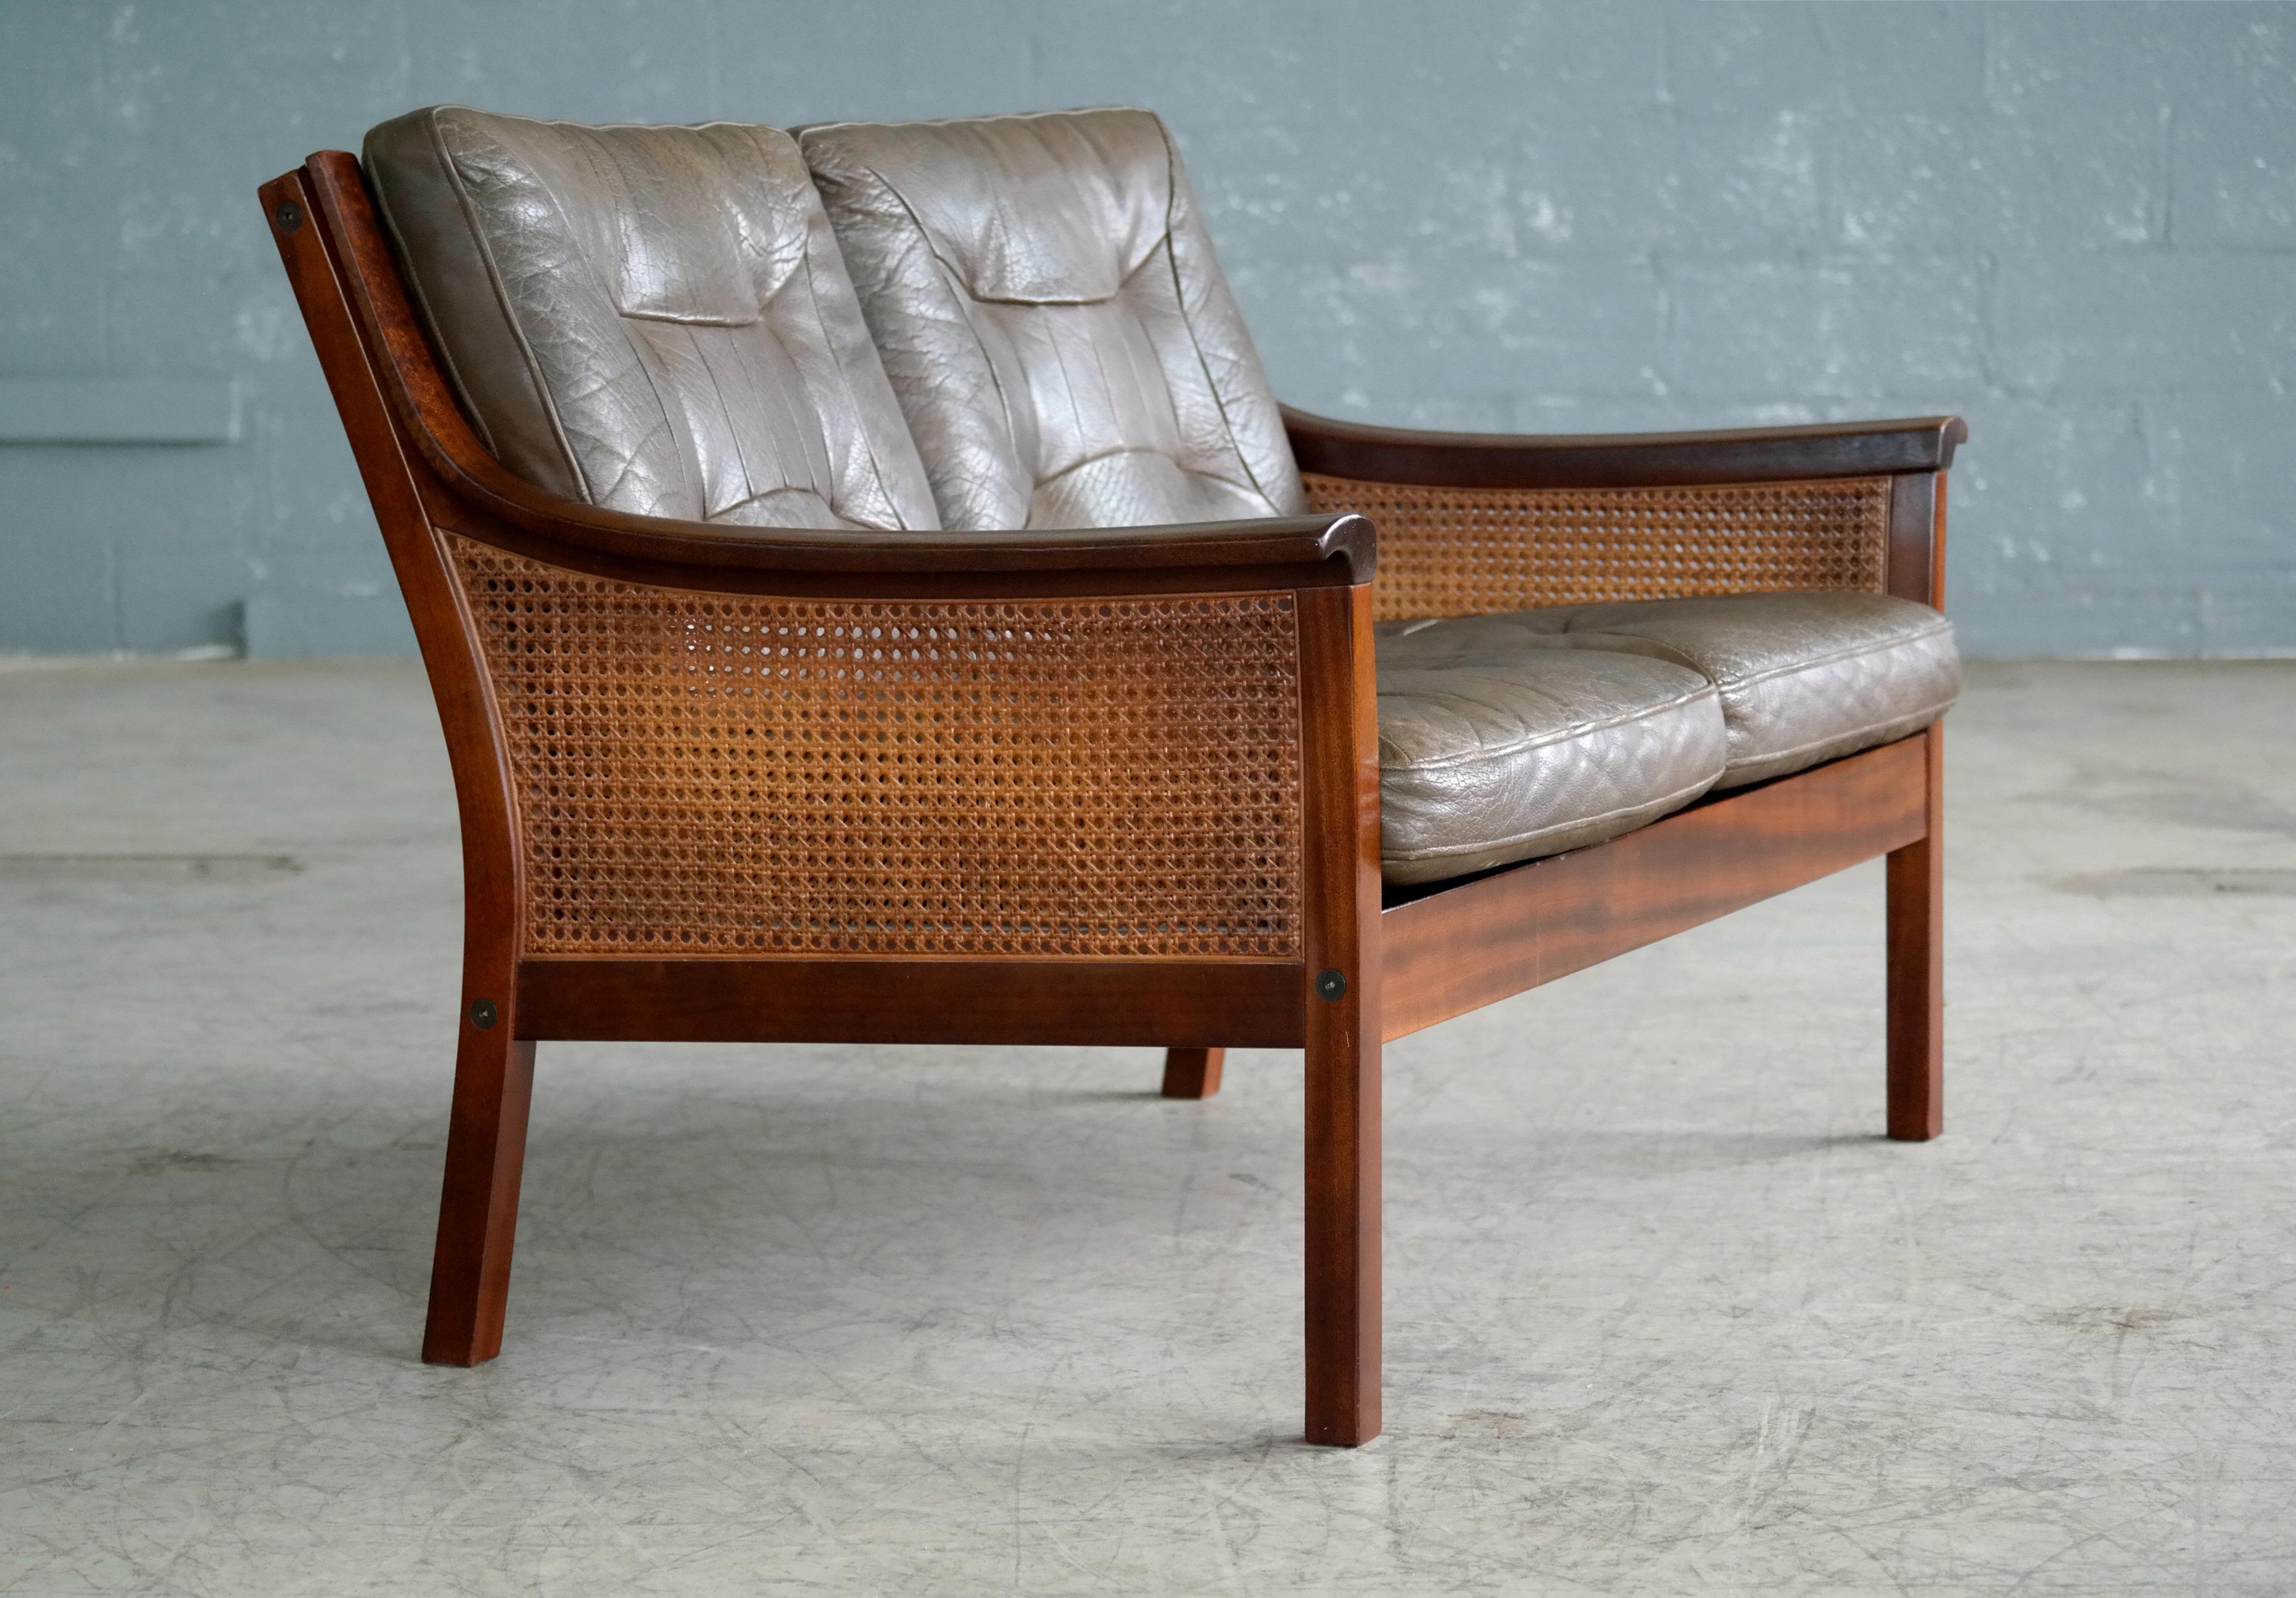 Mid-Century Modern Torbjørn Afdal Settee in Olive Colored Leather and Woven Cane for Bruksbo, 1960s